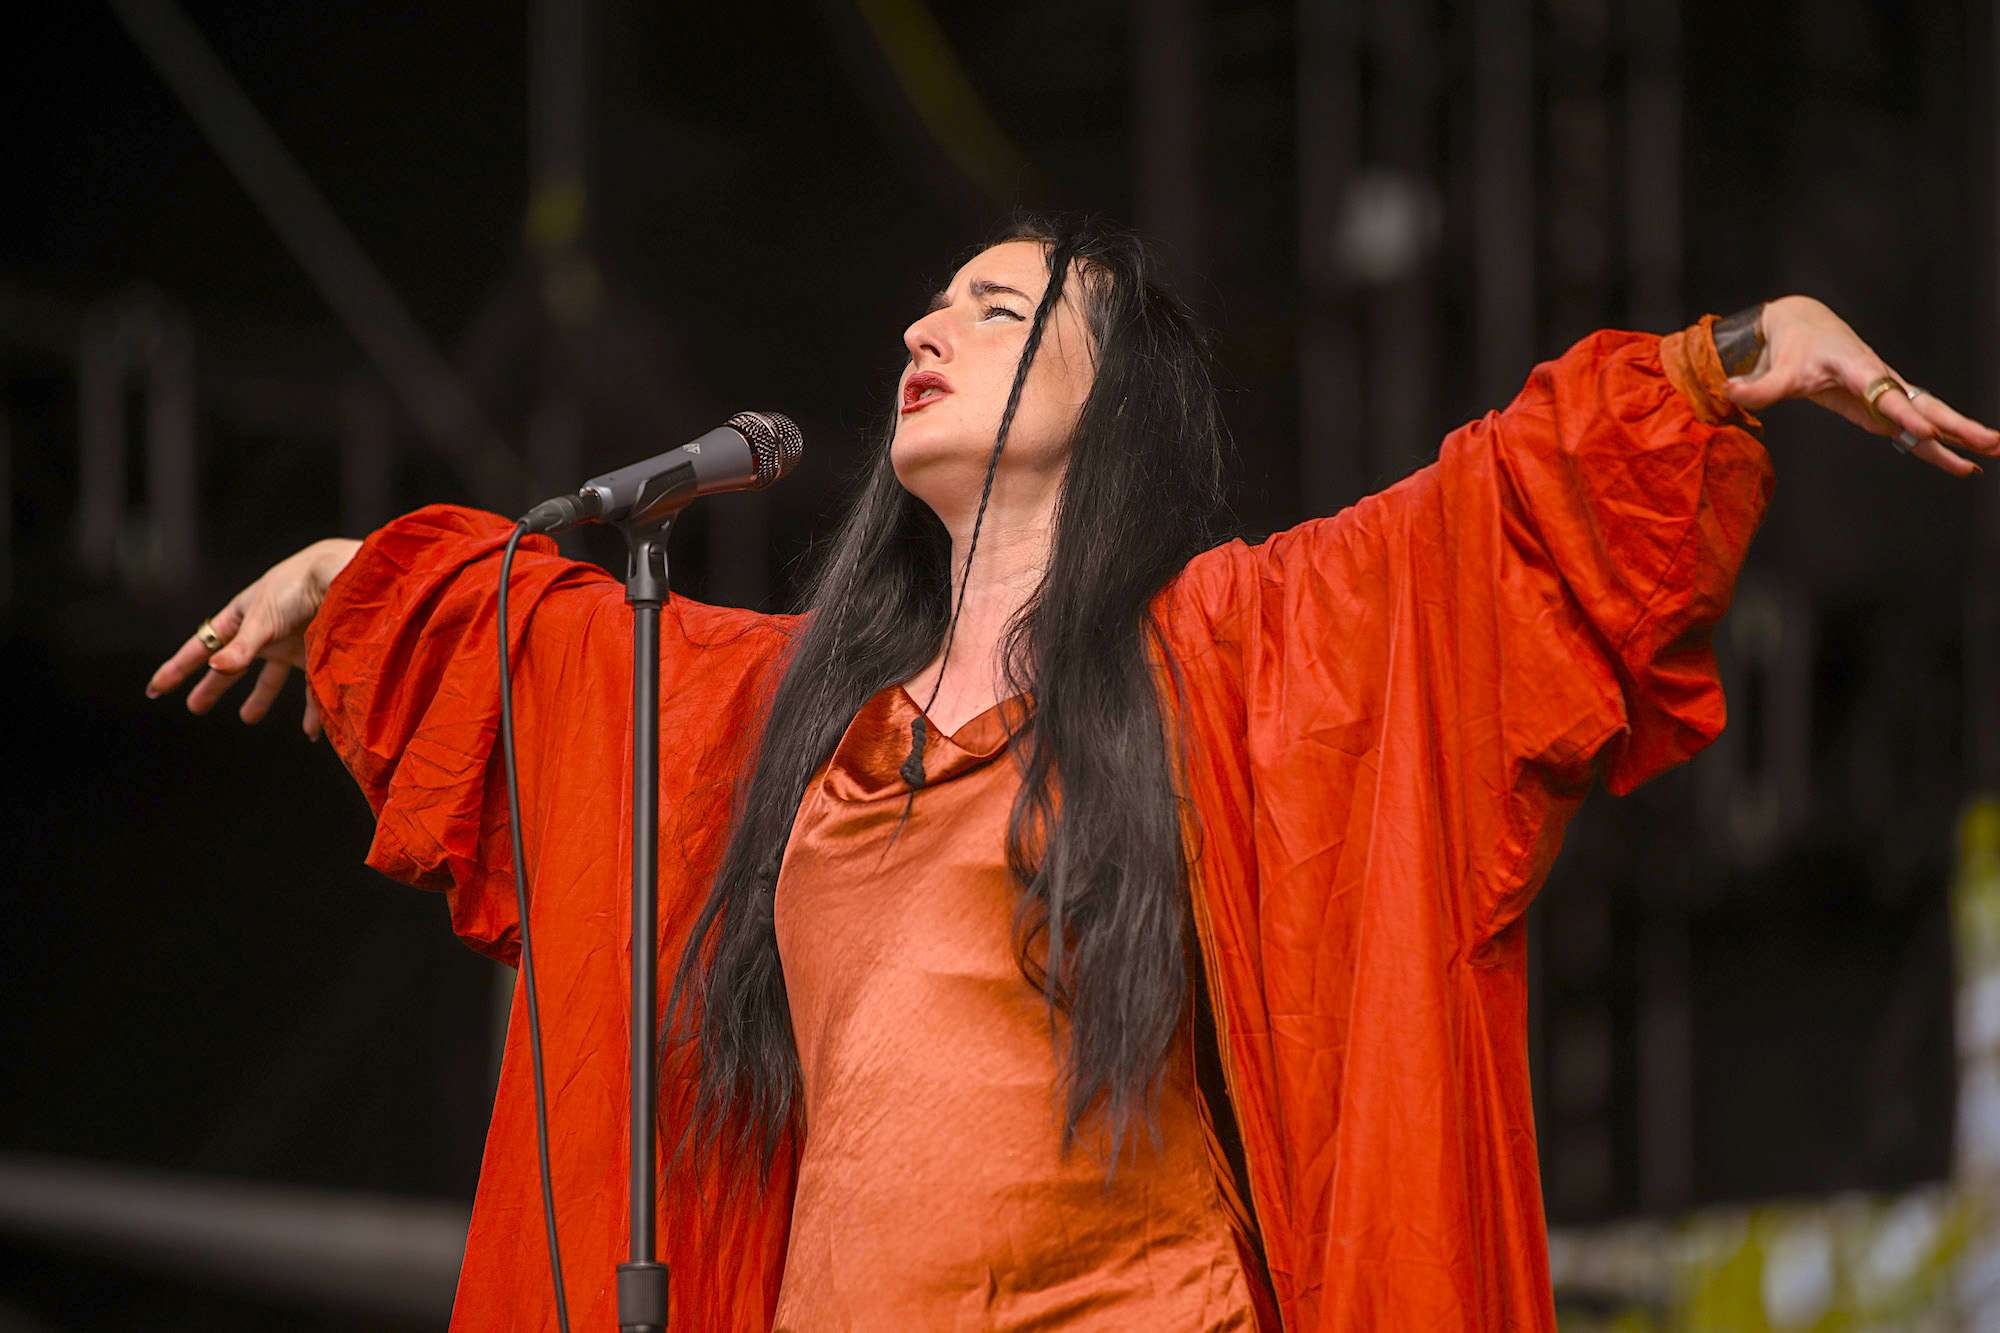 Zola Jesus Live at Riot Fest [GALLERY] 2